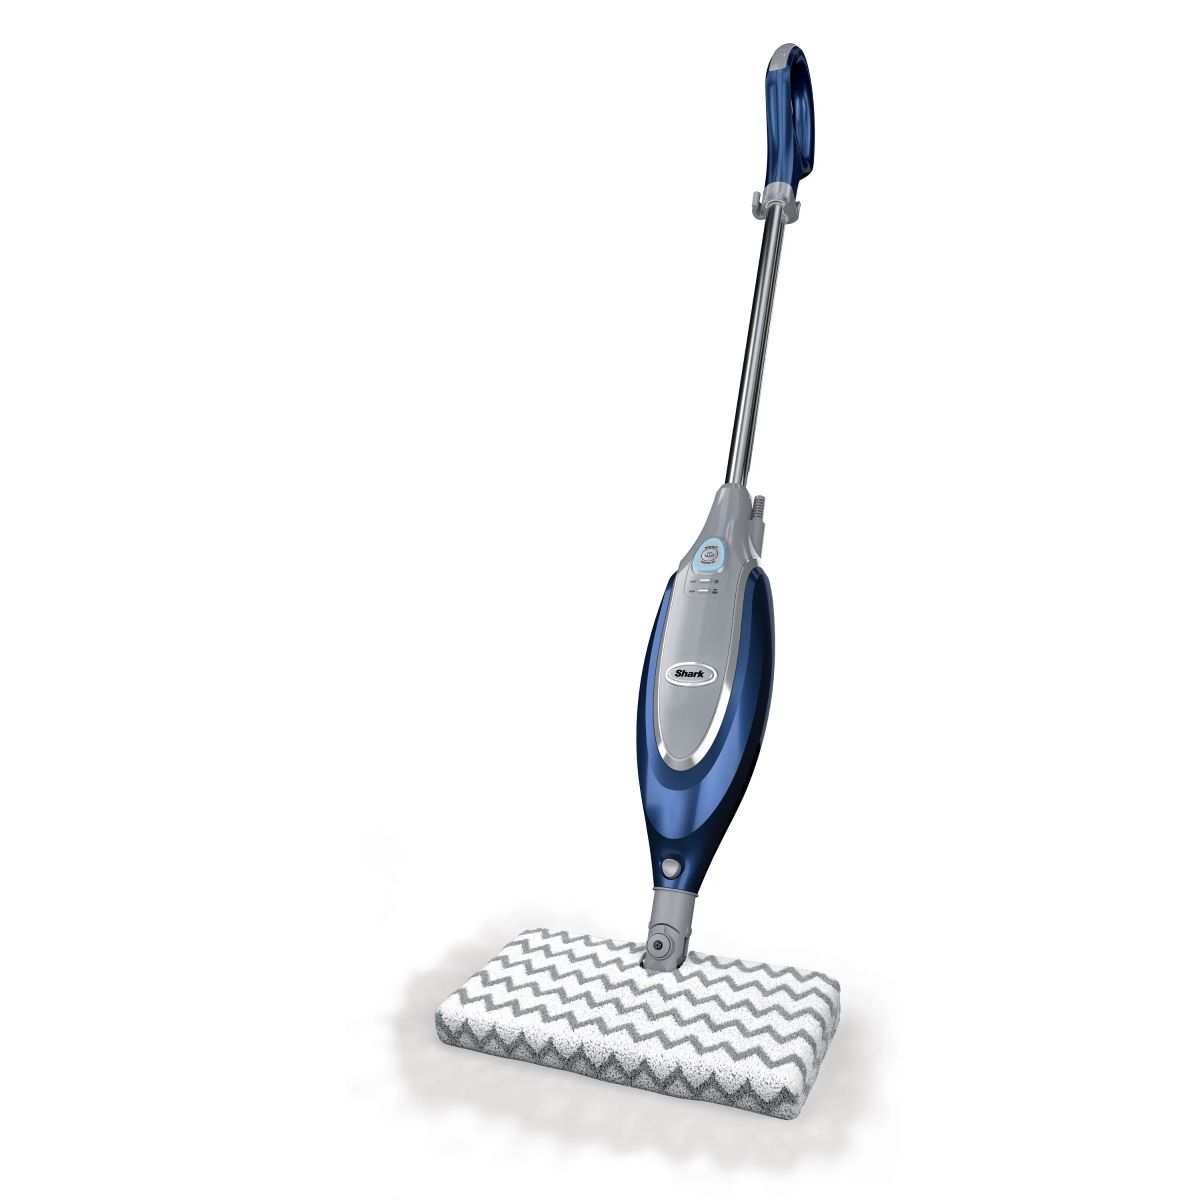 Shark Genius Steam Pocket Mop with 2 Washable Microfiber Pads 